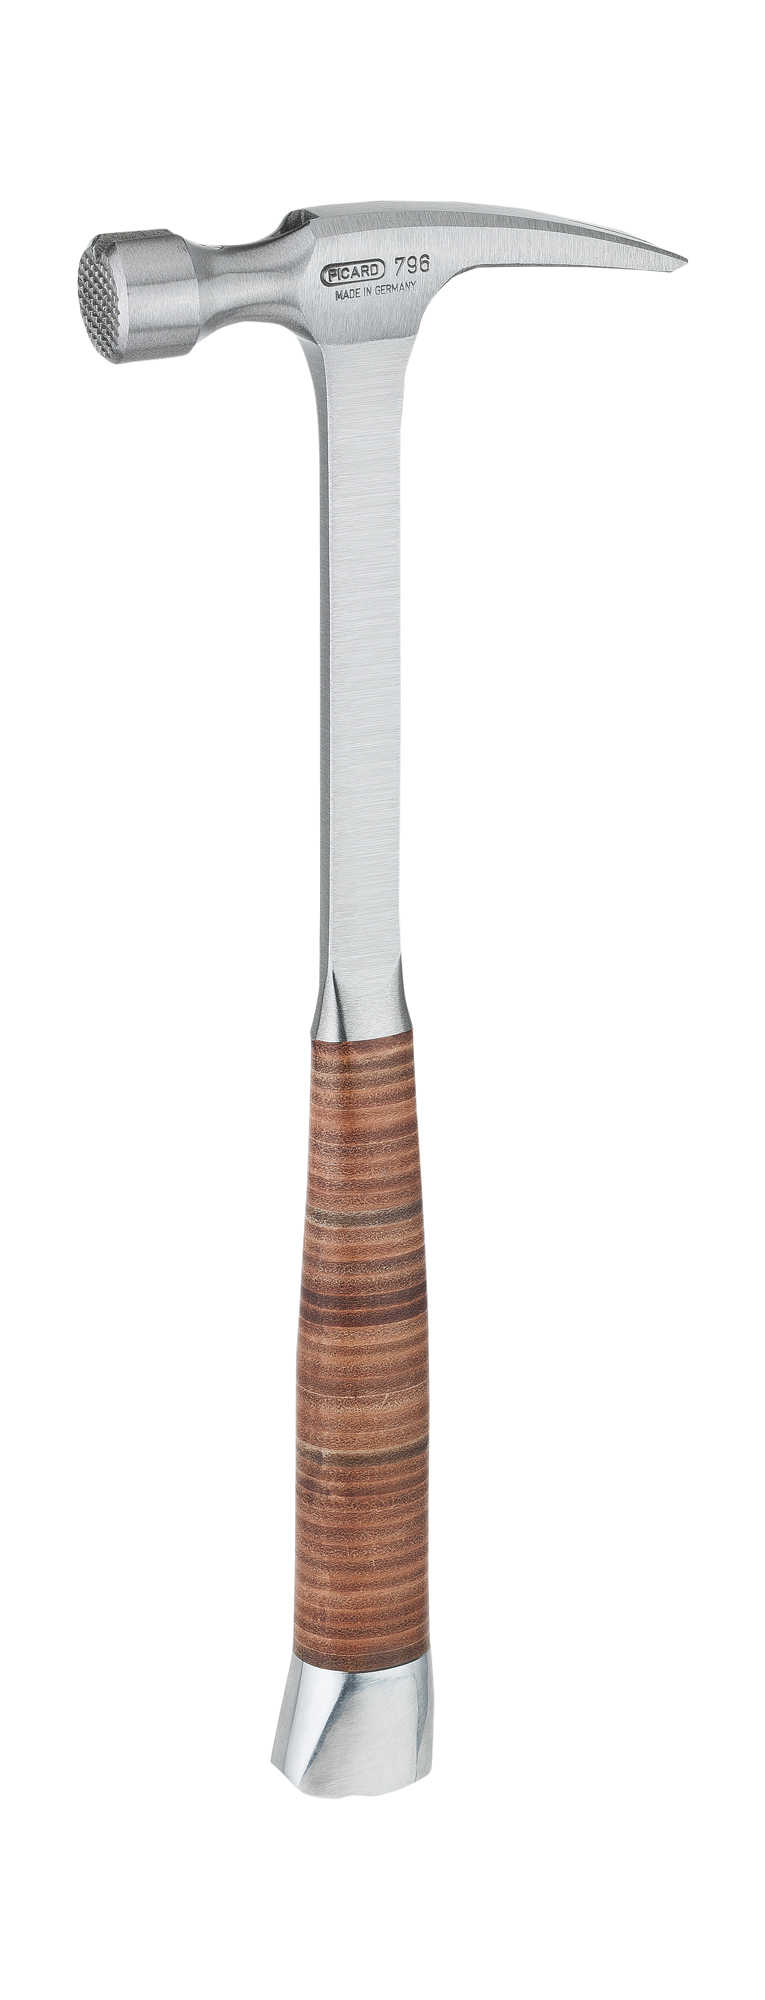 Picard 079600-22 Solid Steel Framing Hammer with Leather Grip and Magnetic Nail Start - Smooth Face